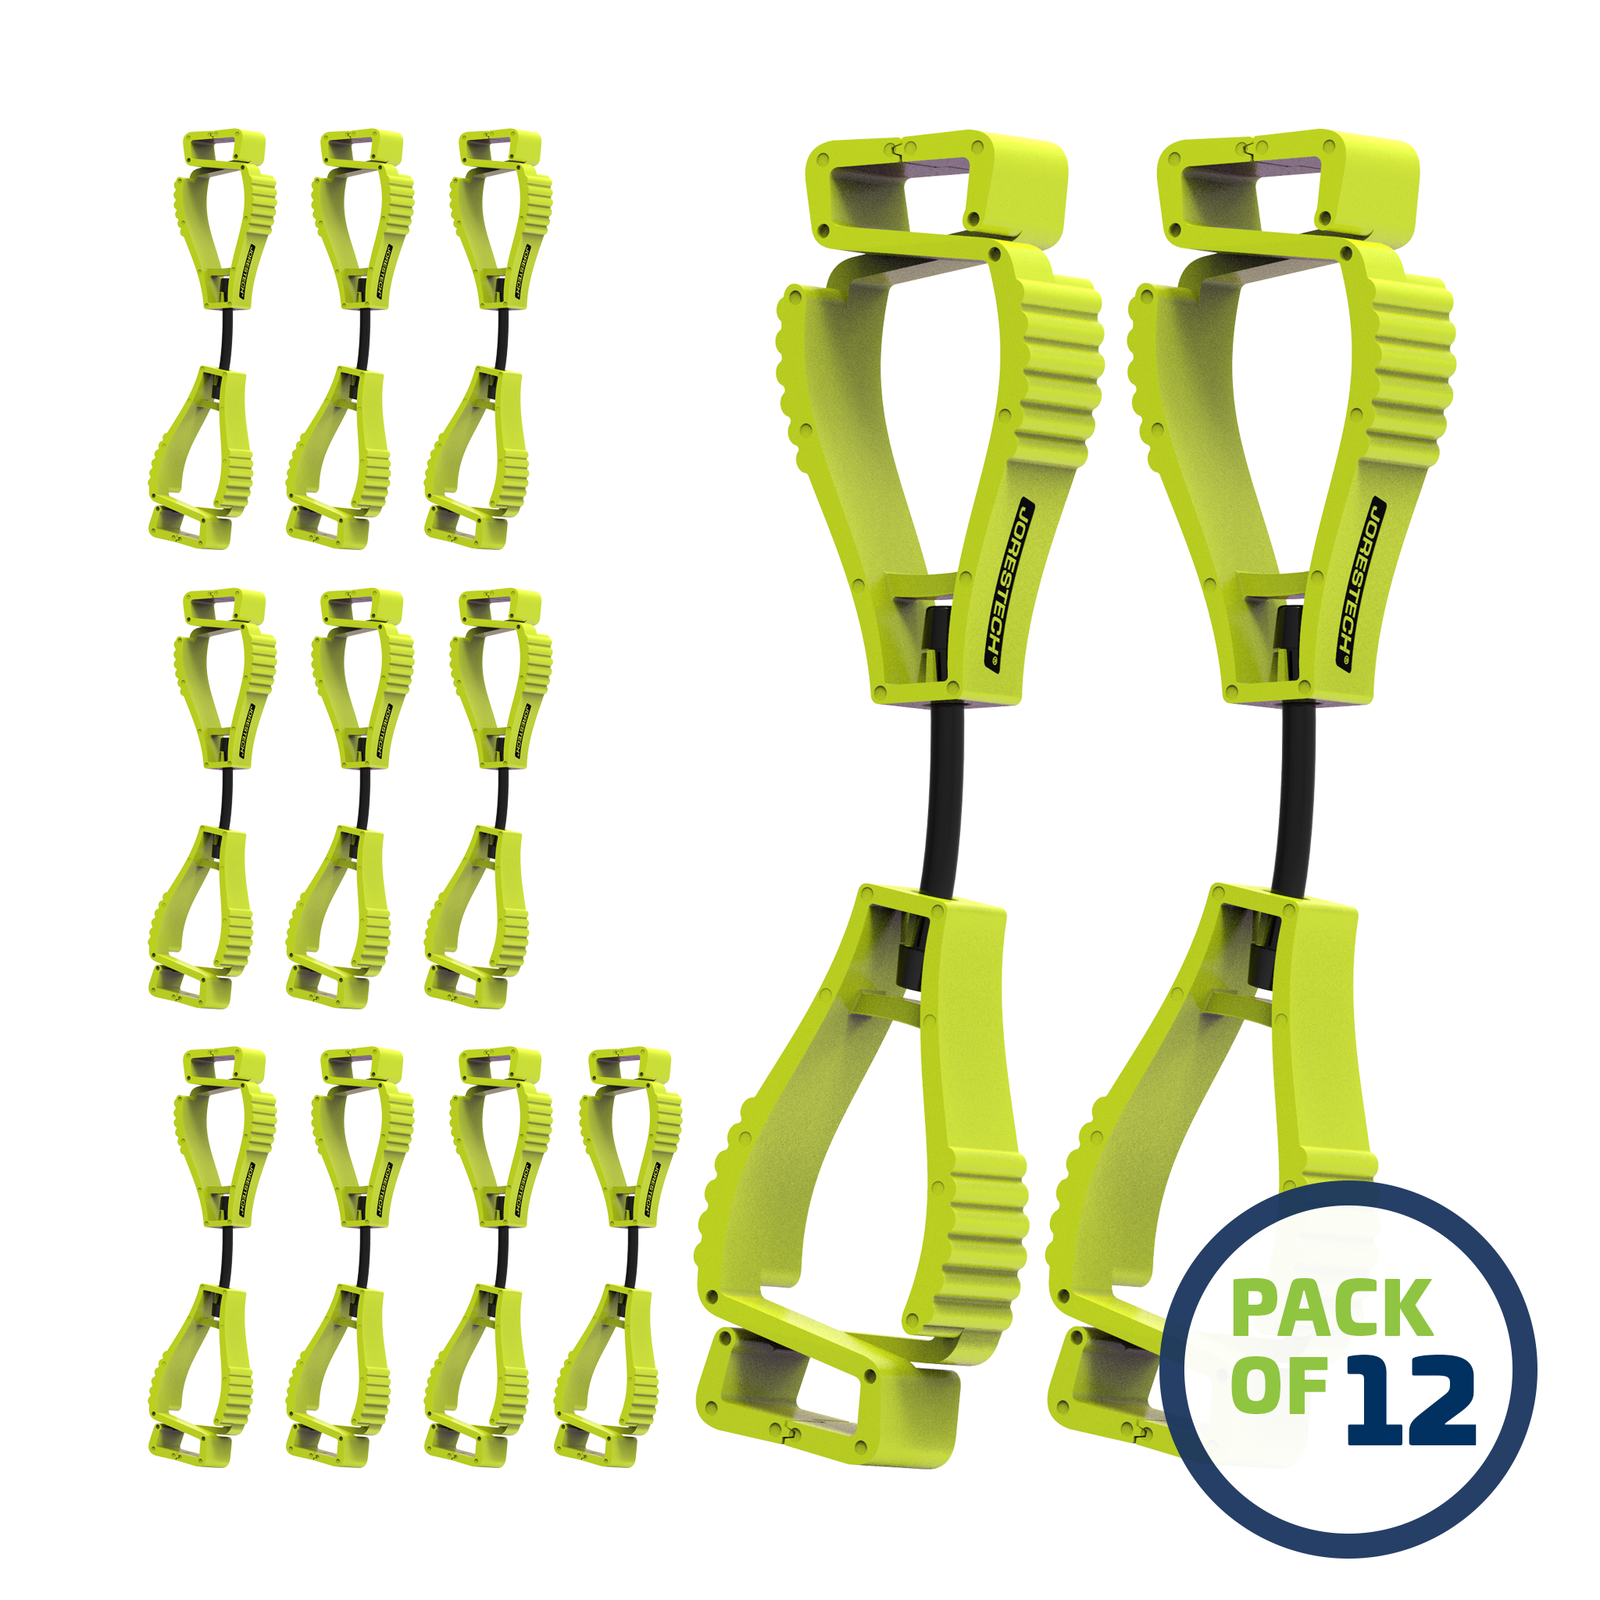 24 Lime glove clip safety holders over white background